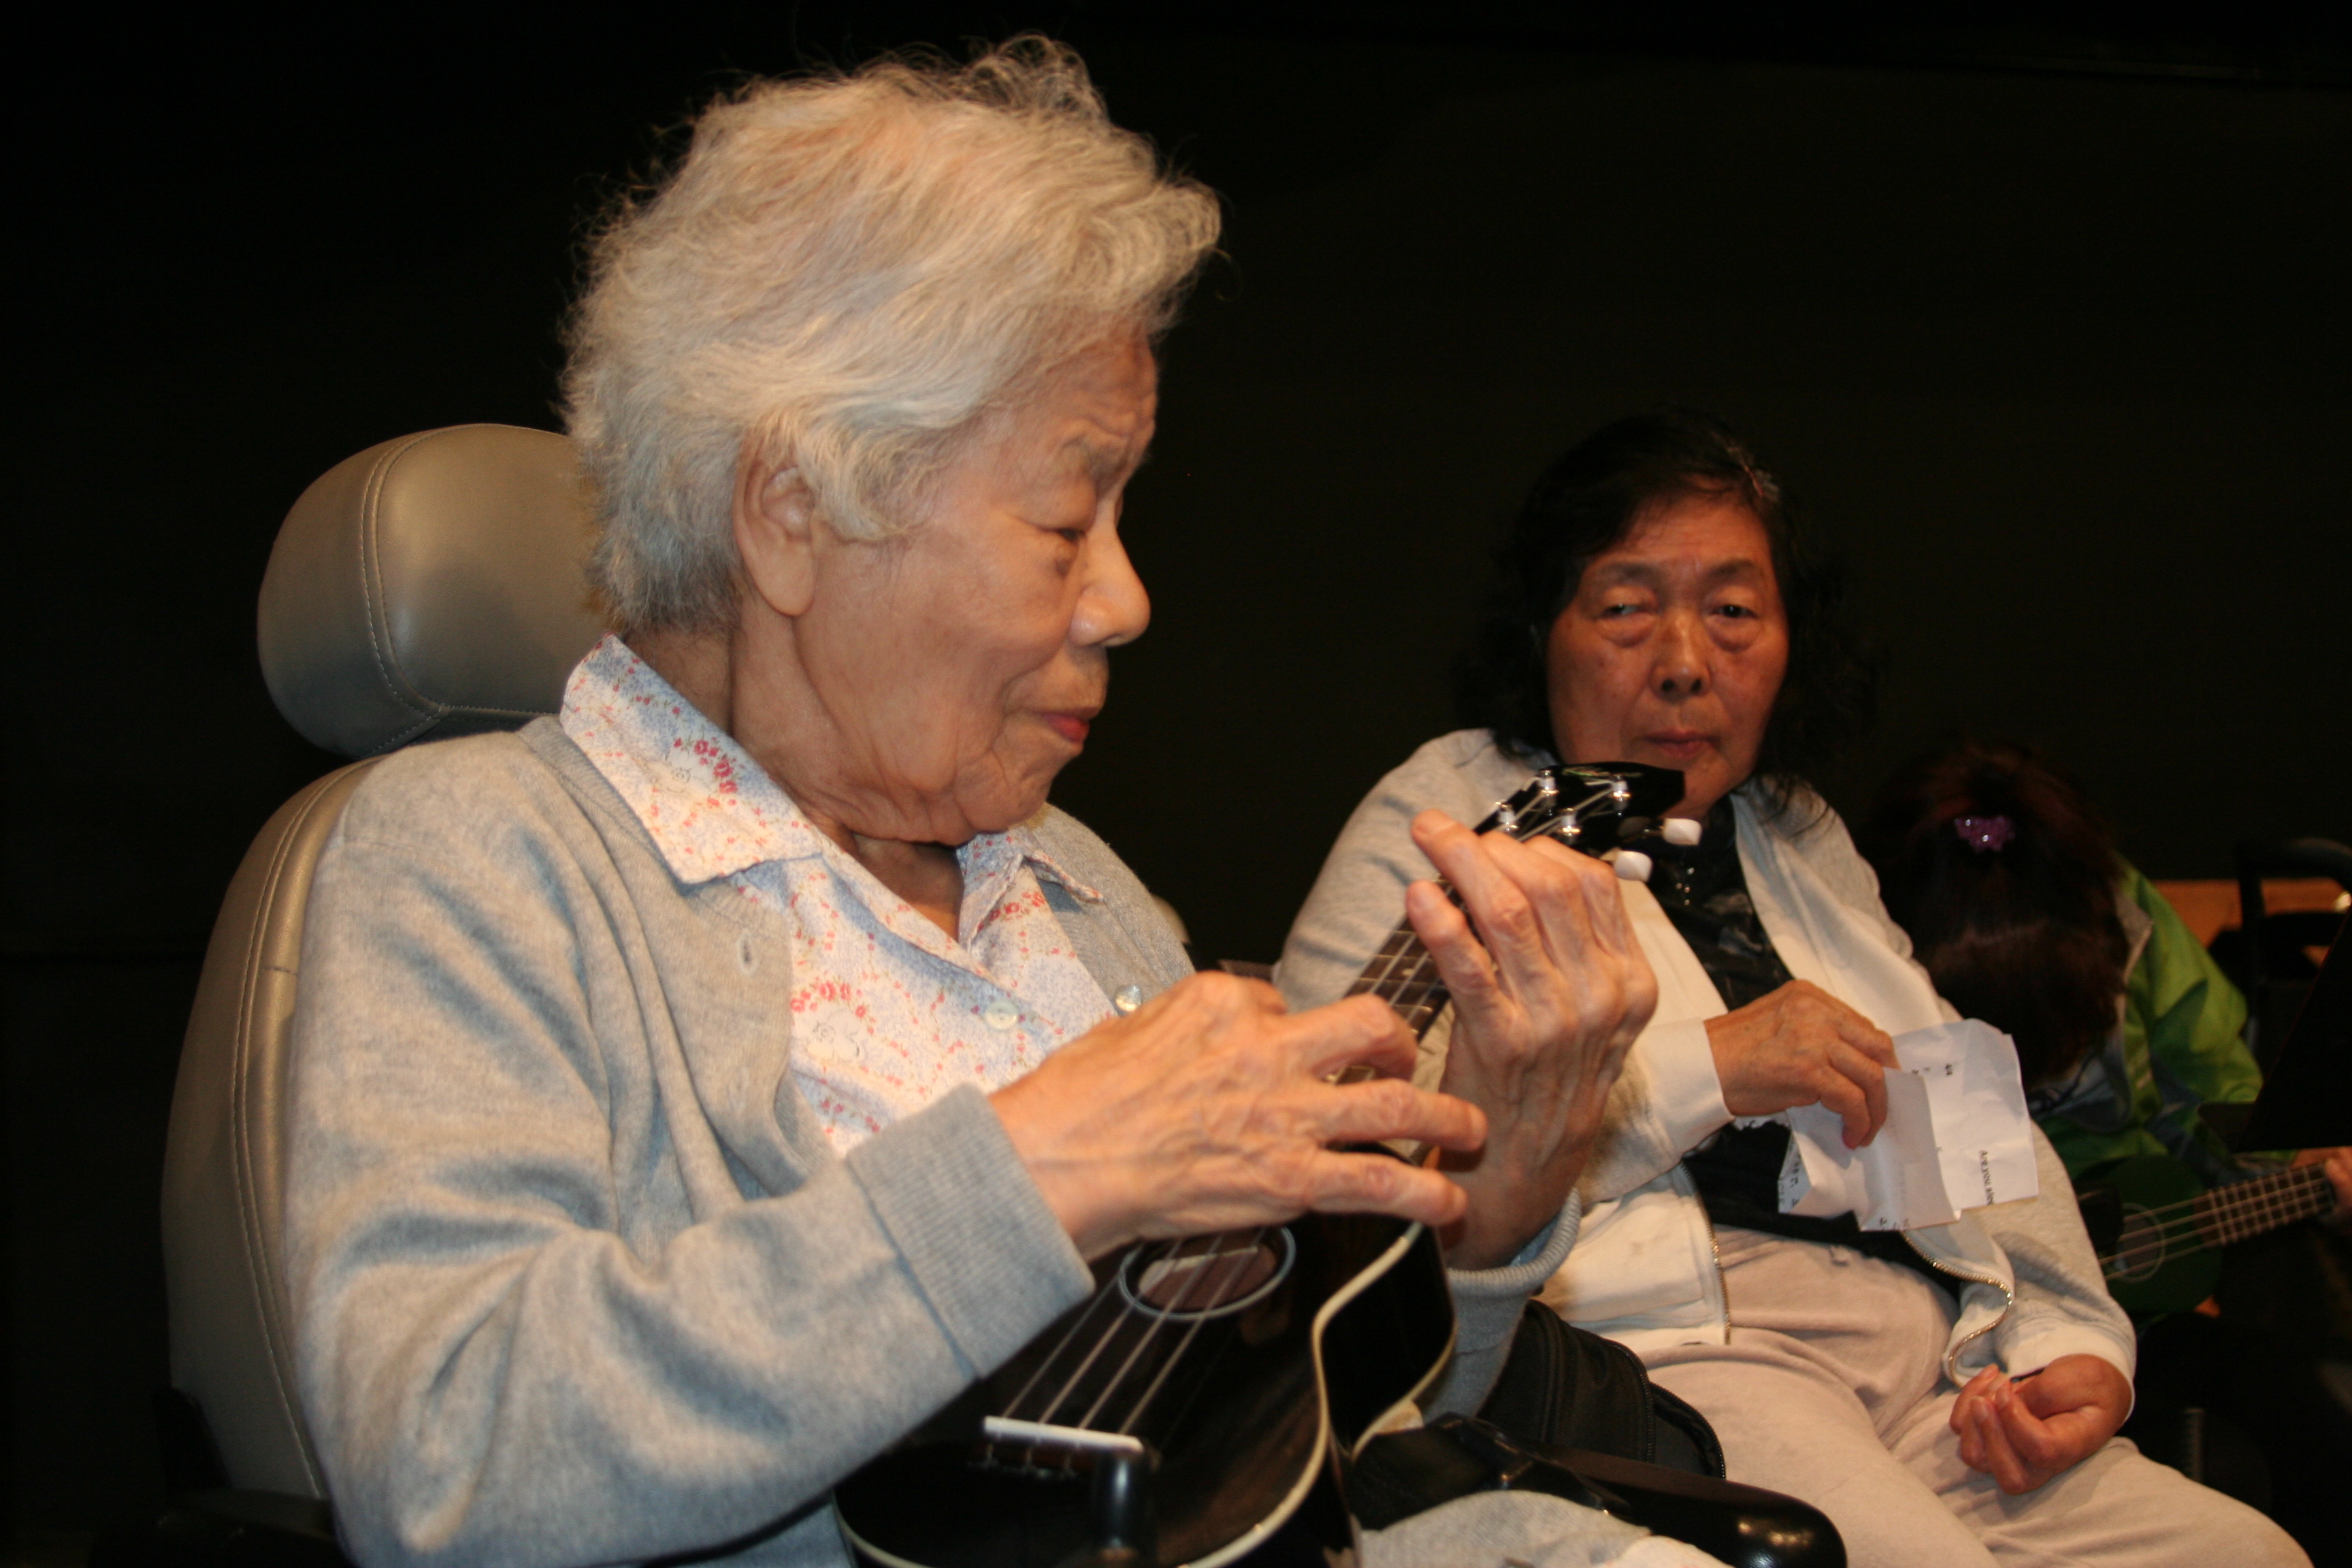 Older woman plays ukulele while another older woman watches.